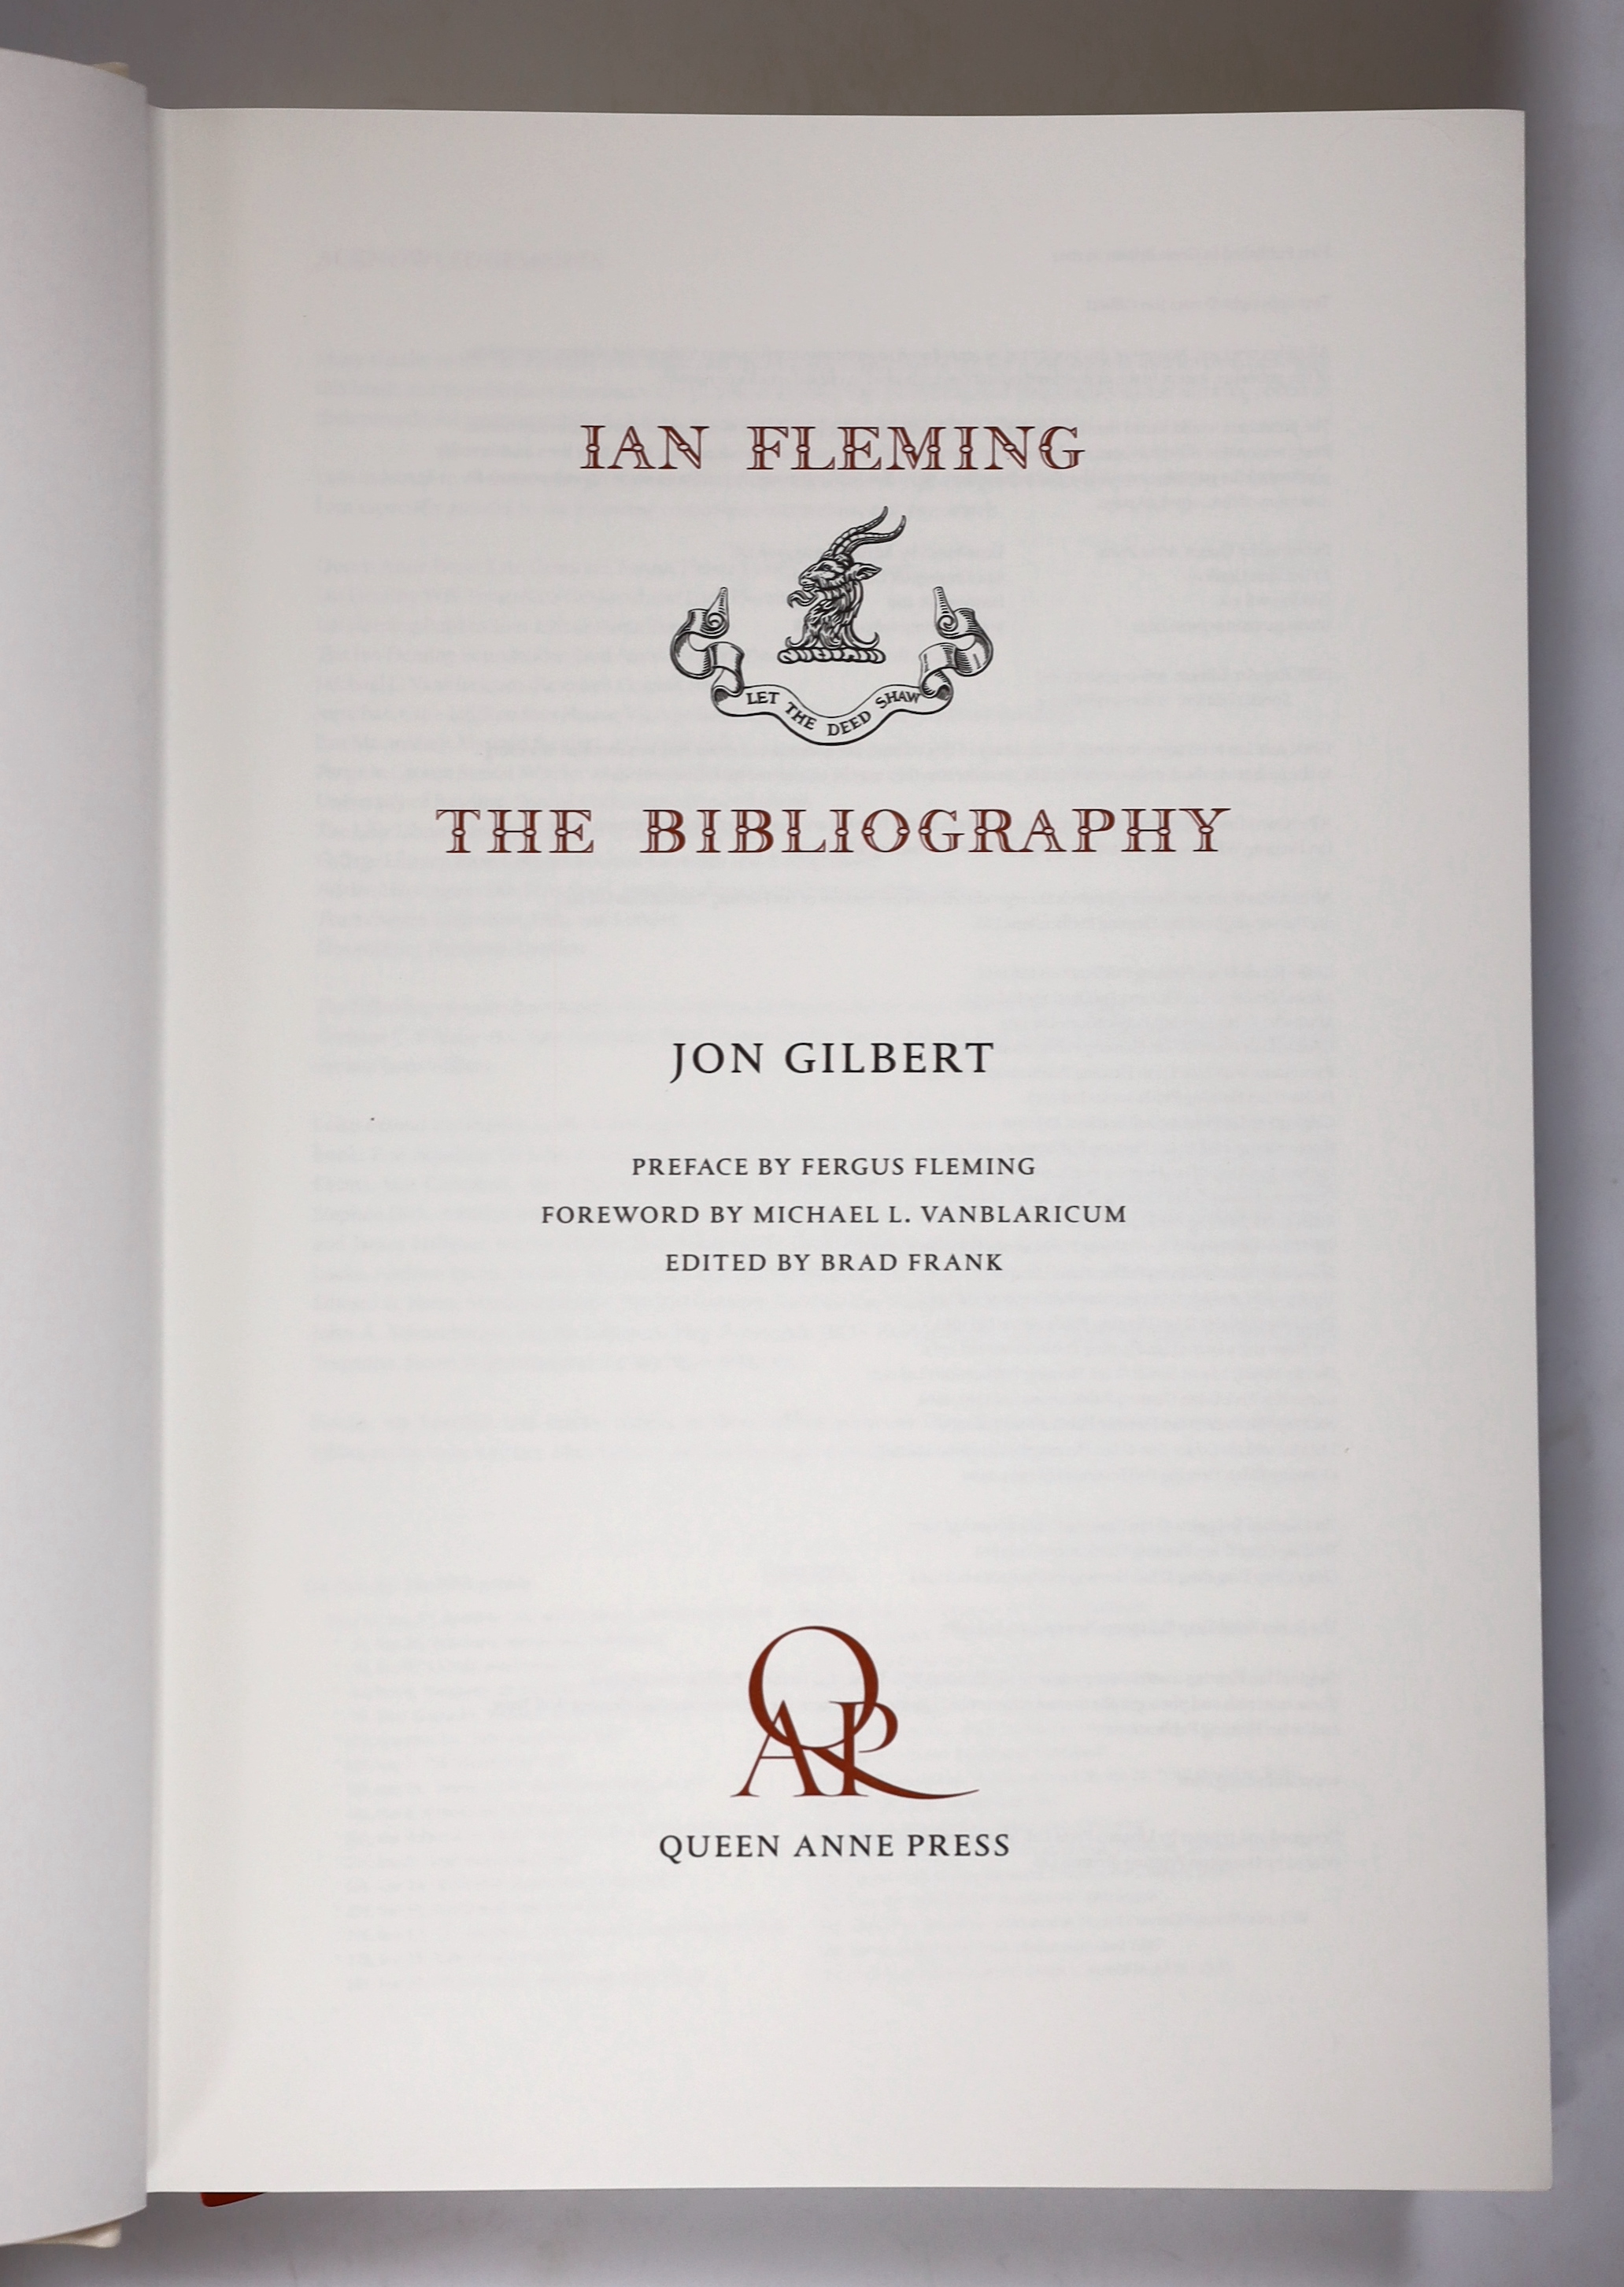 Gilbert, Jon - Ian Fleming: The Bibliography, 1st edition , folio, quarter vellum, portrait frontispiece, colour plates and black and white illustrations to text, Queen Anne Press, London, 2012, in slip case.